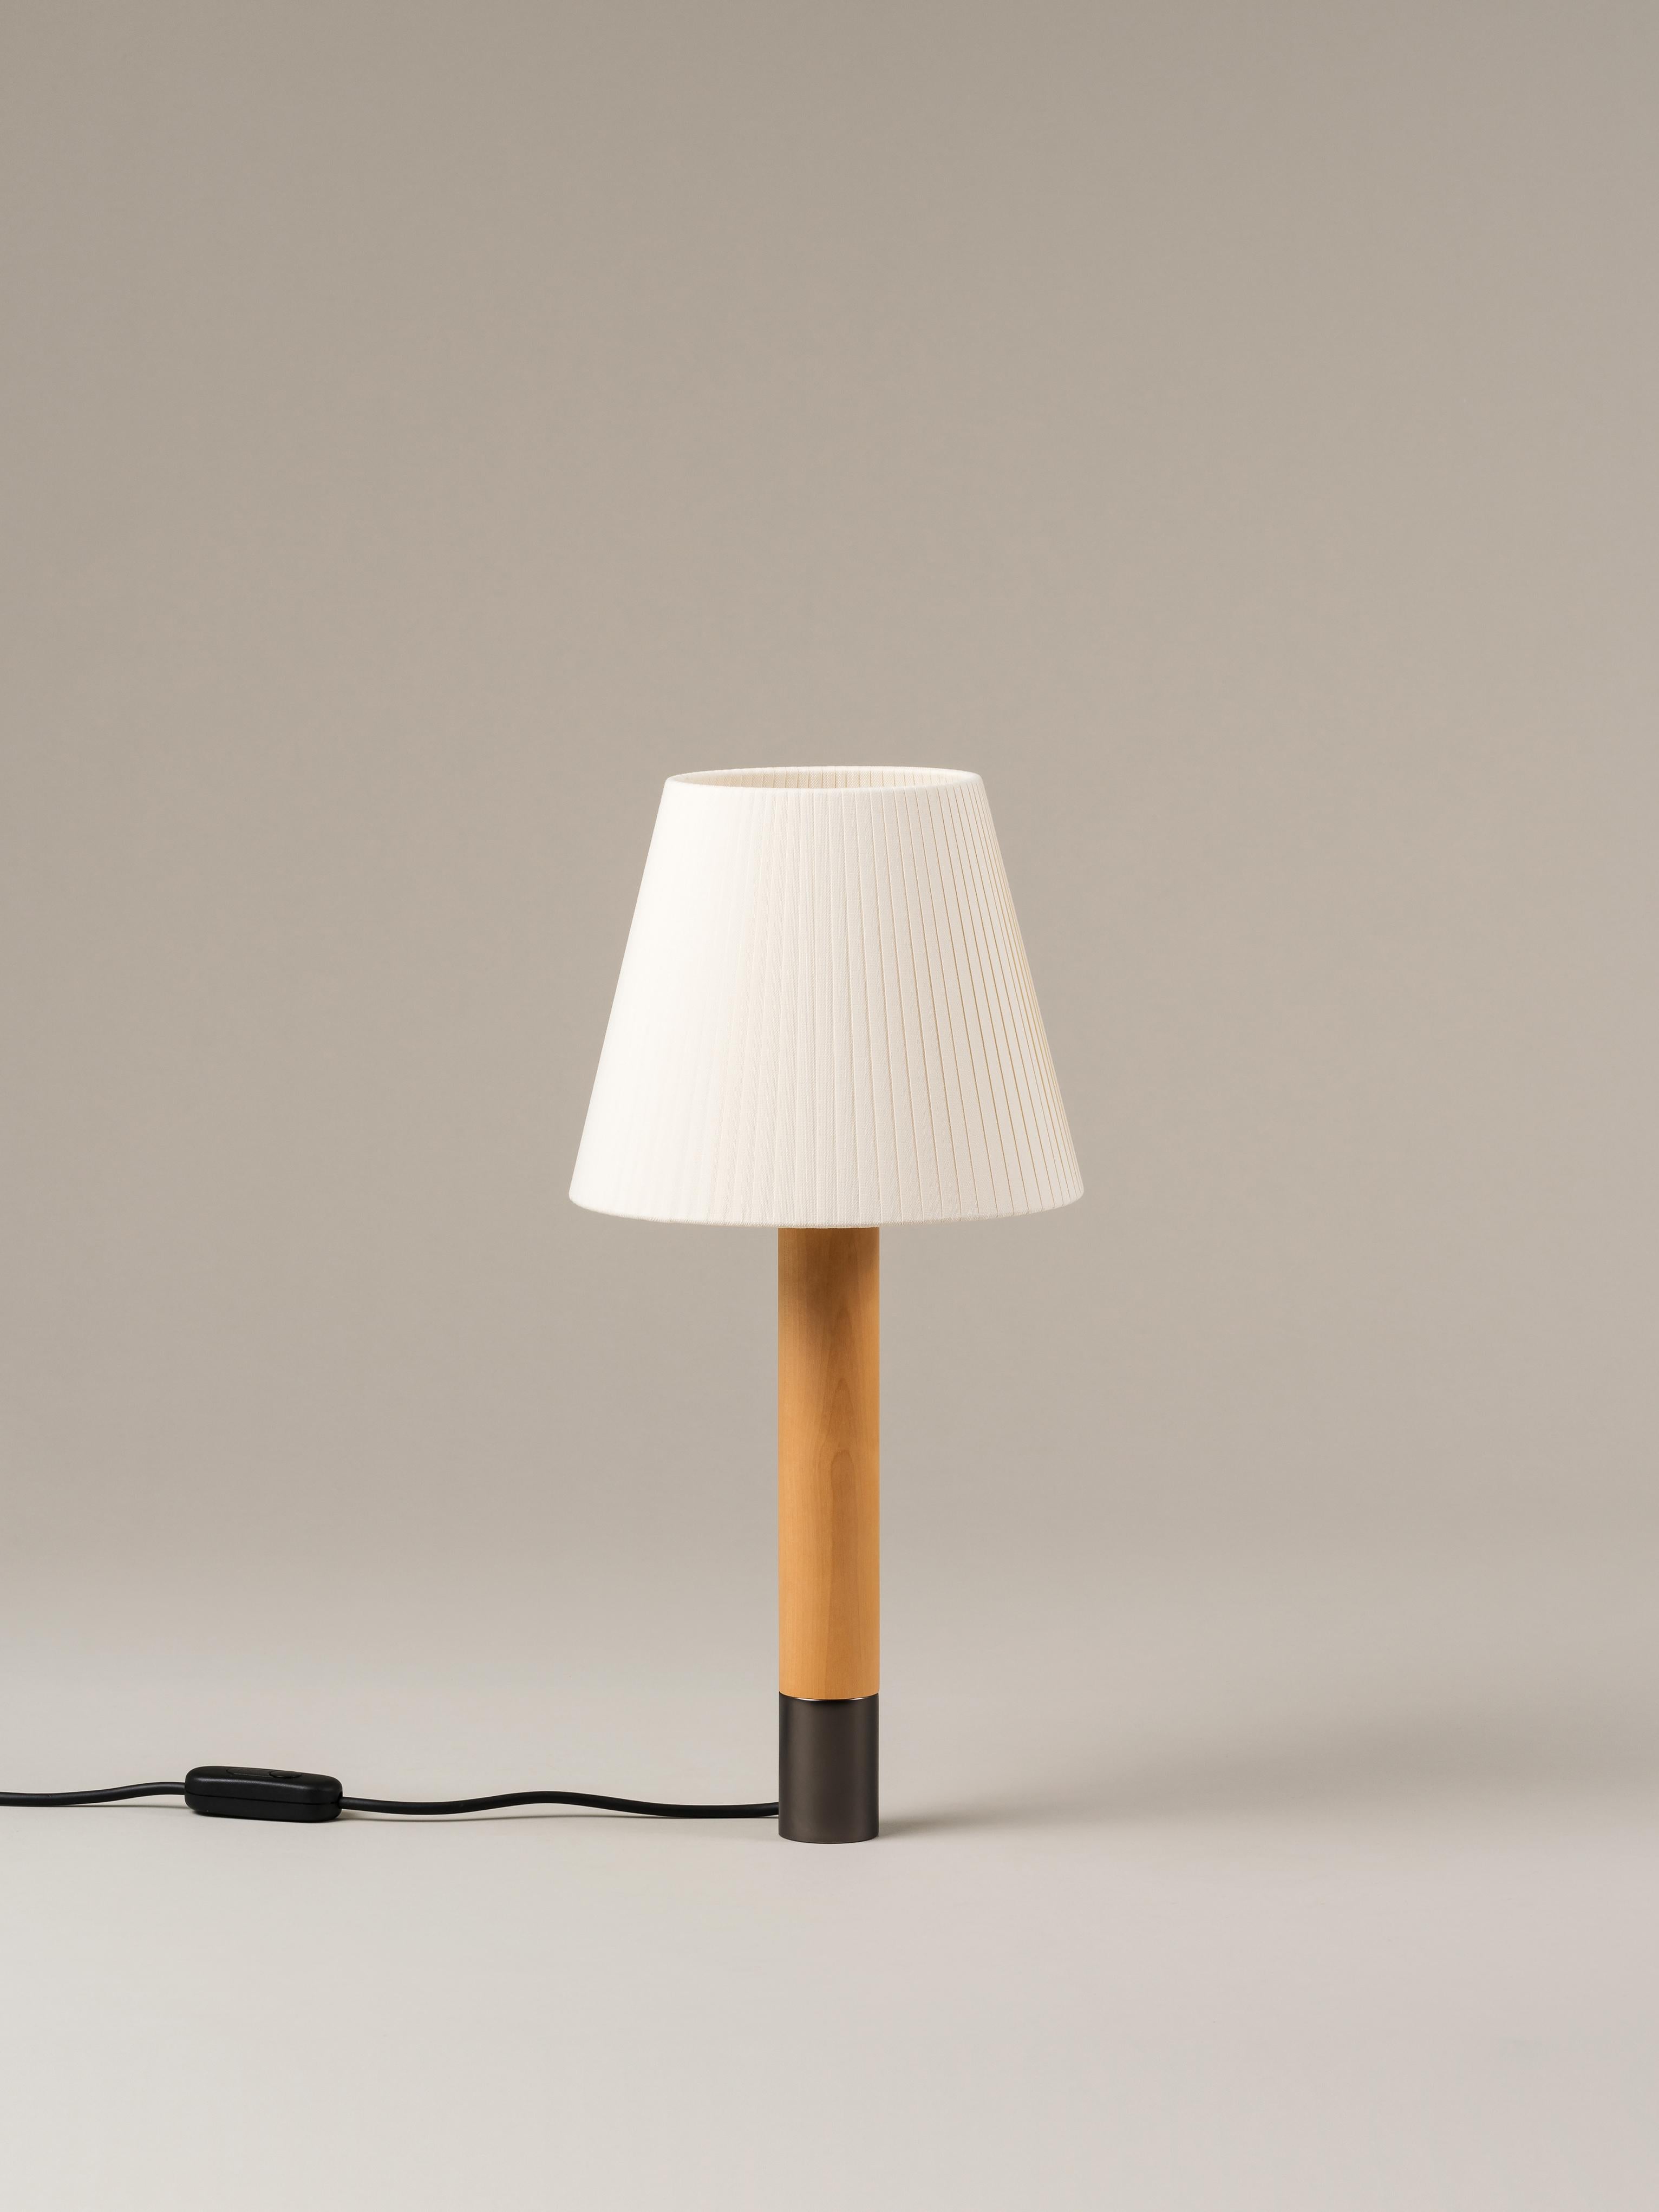 Modern Bronze and Natural Básica M1 Table Lamp by Santiago Roqueta, Santa & Cole For Sale